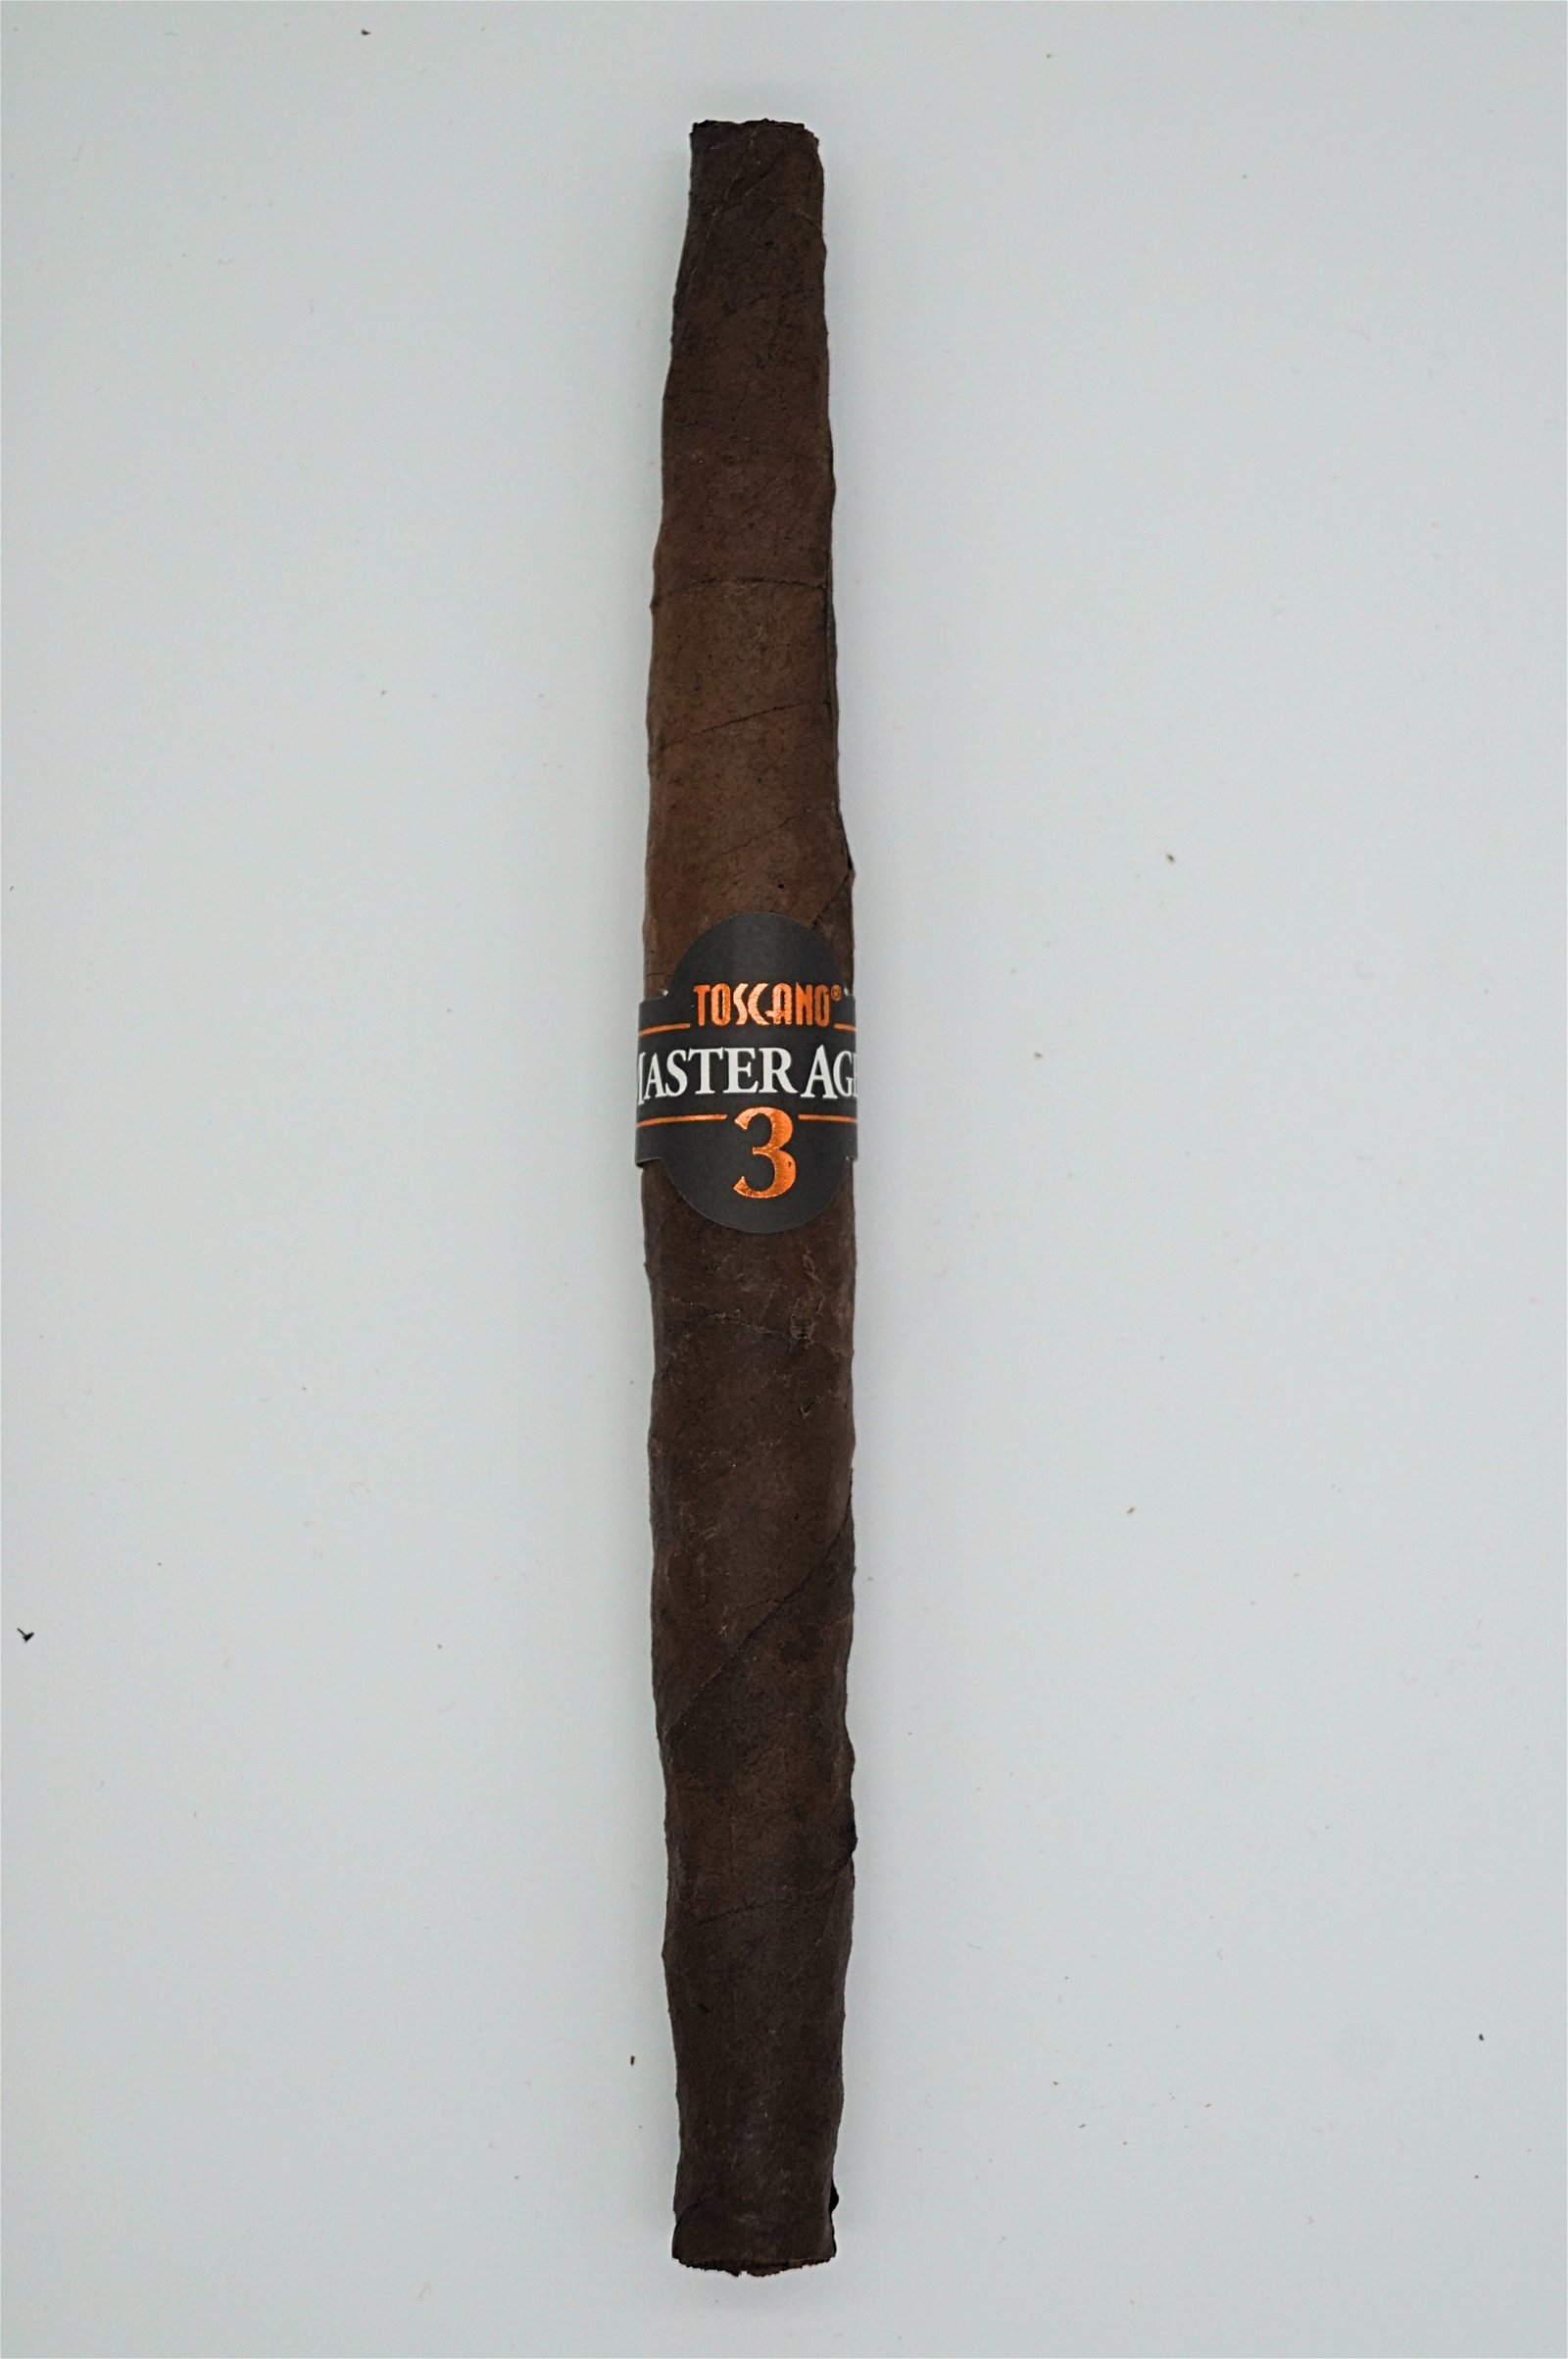 Toscano Master Aged Serie 3